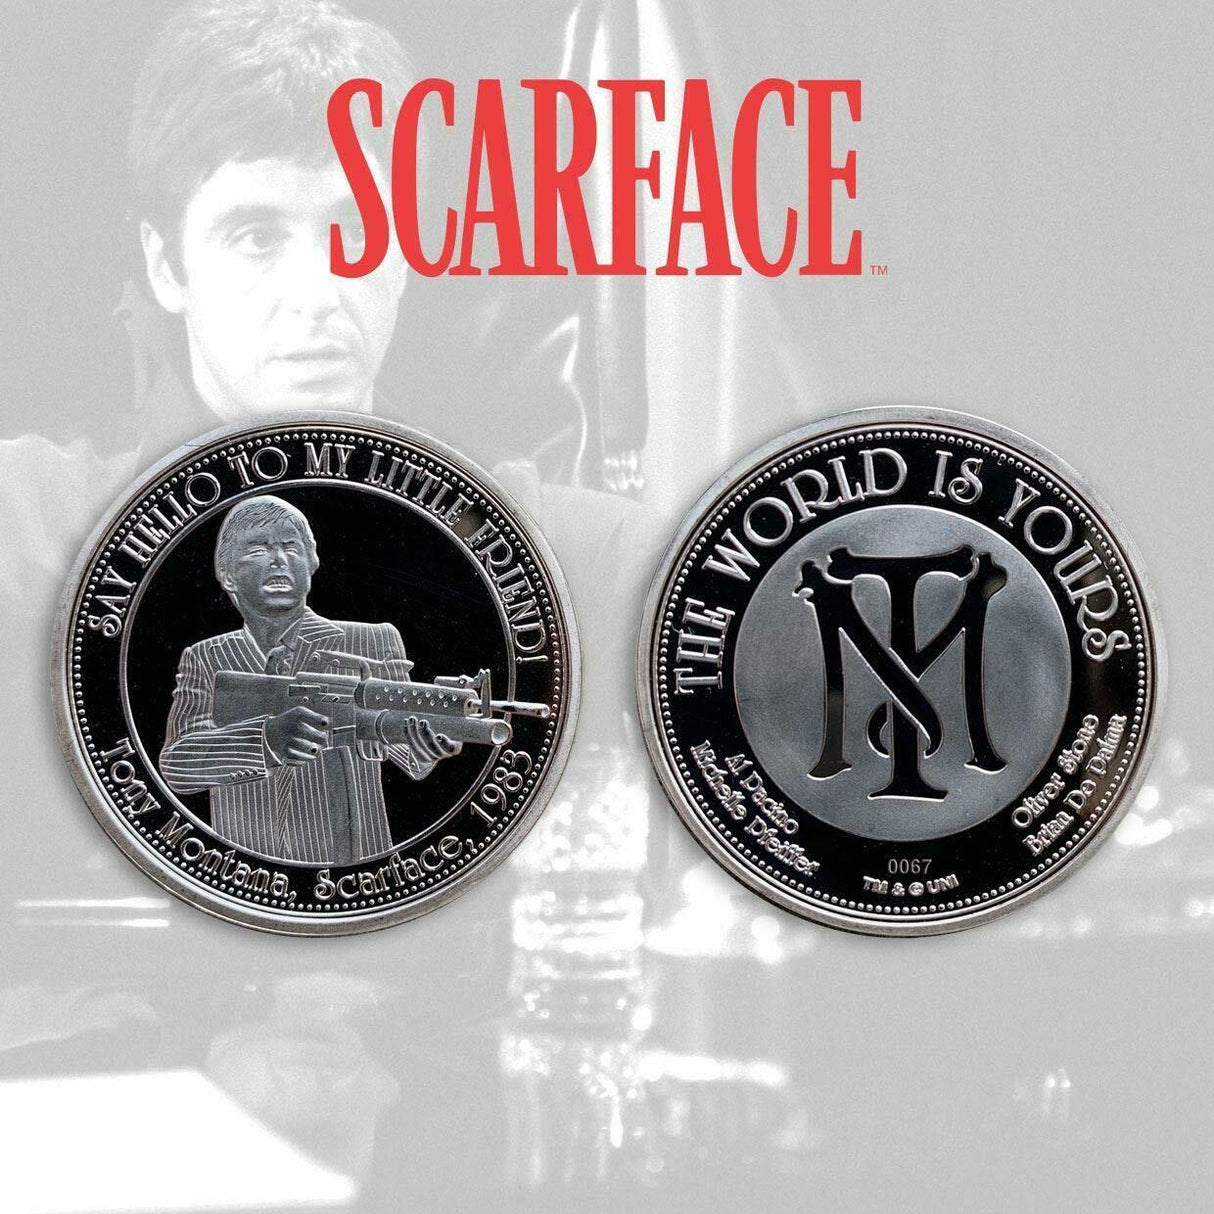 Scarface Limited Edition Coin